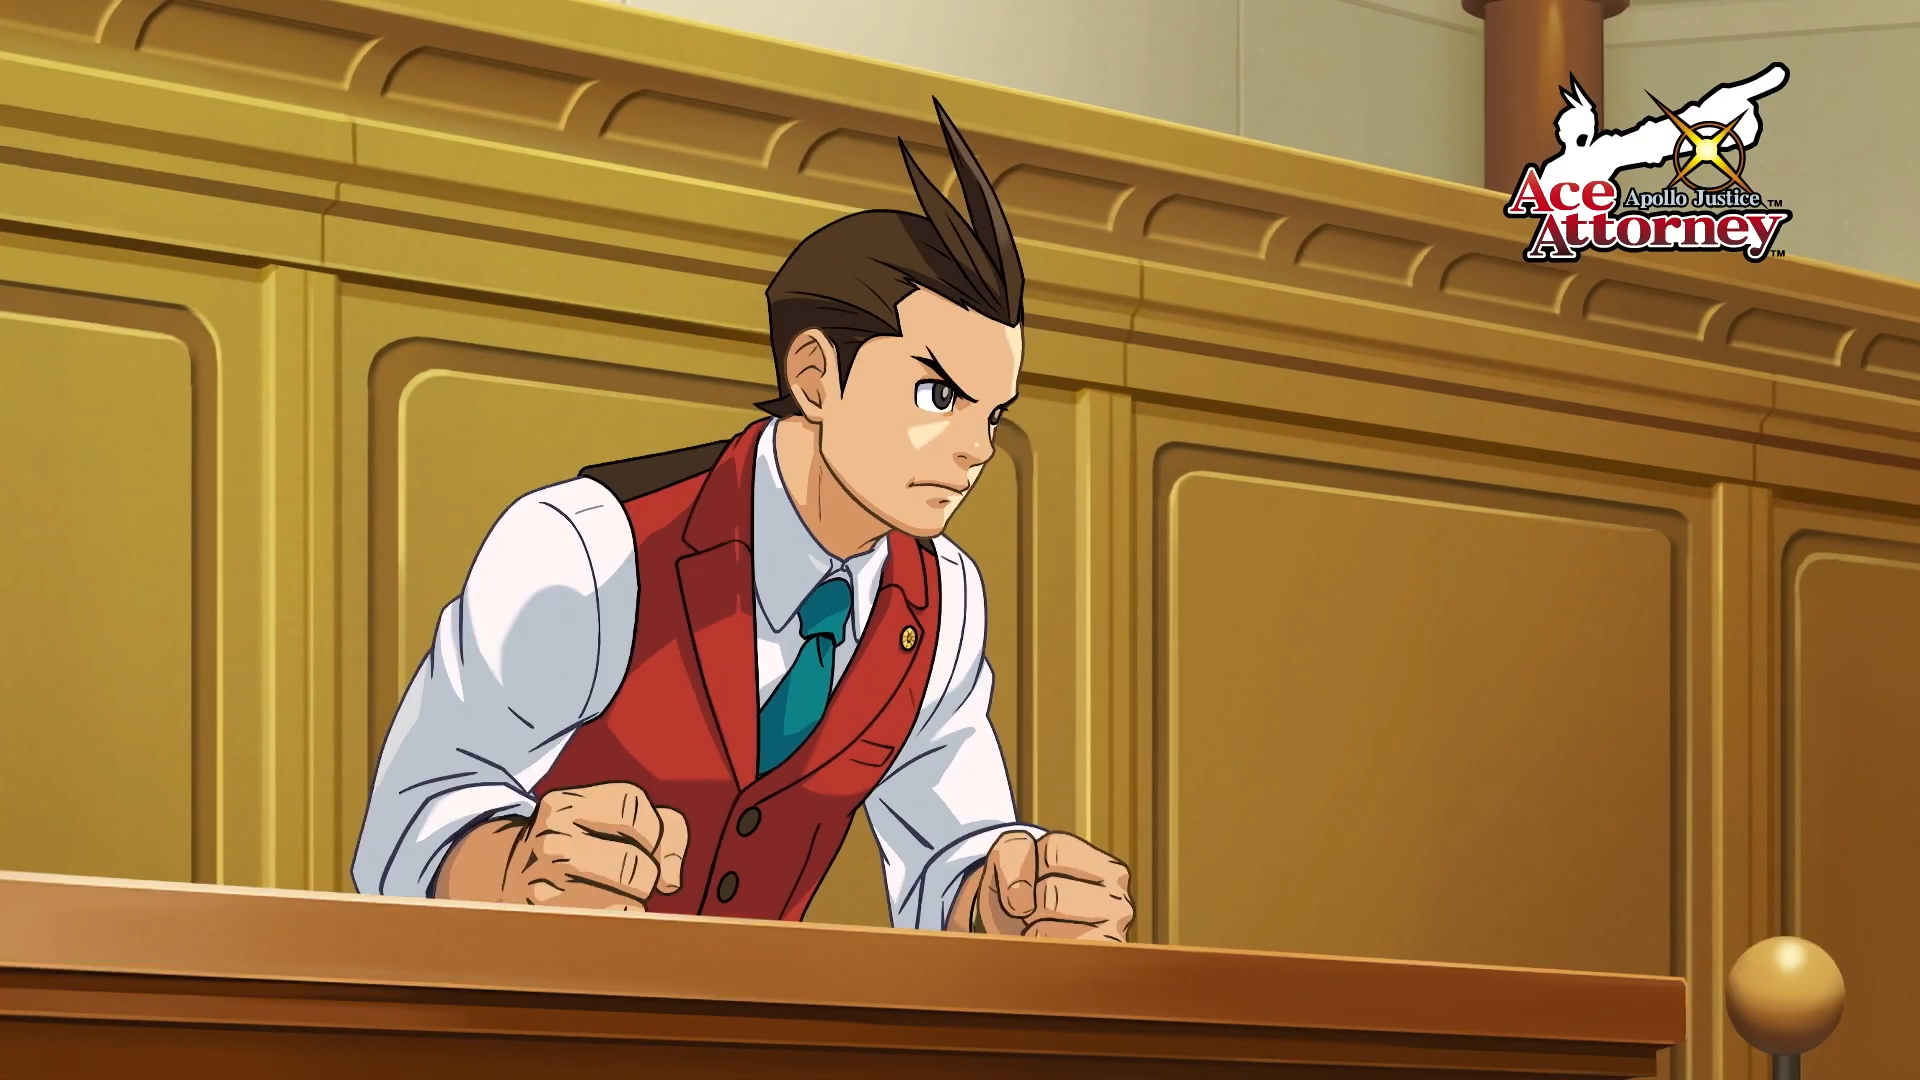 Ace Attorney: Episode 1 Review